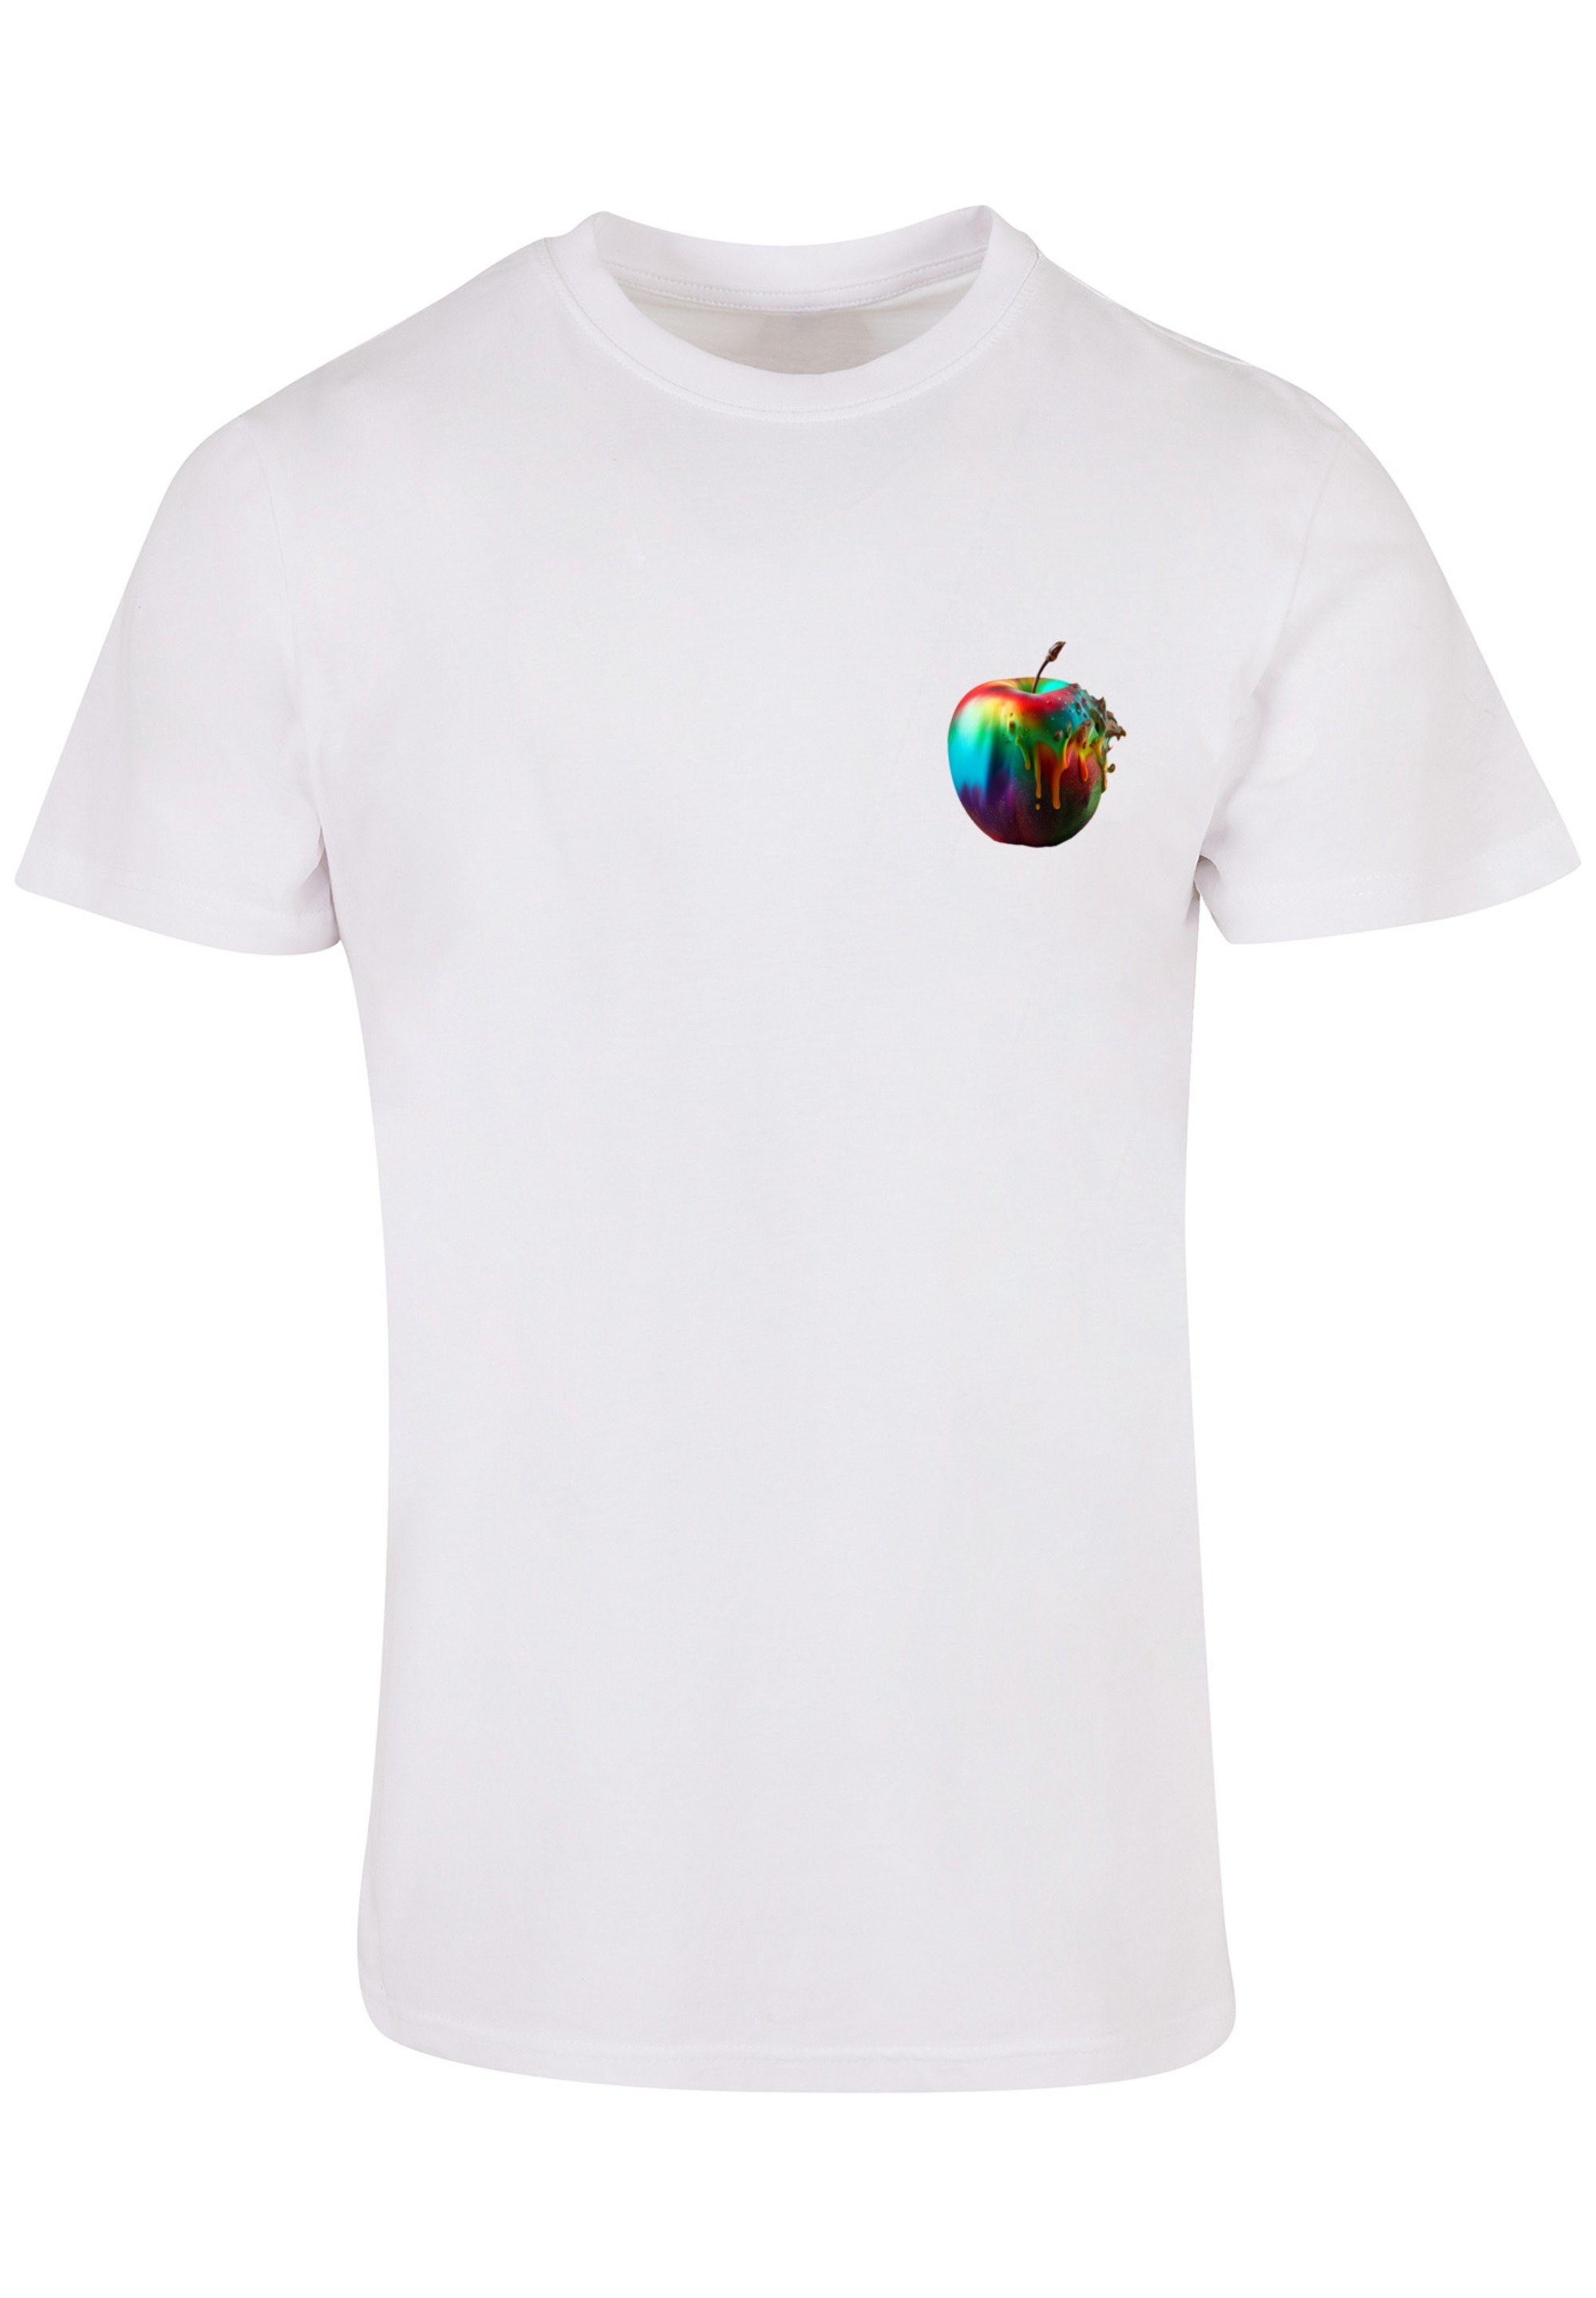 Colorfood Print T-Shirt weiß Collection Apple - Rainbow F4NT4STIC